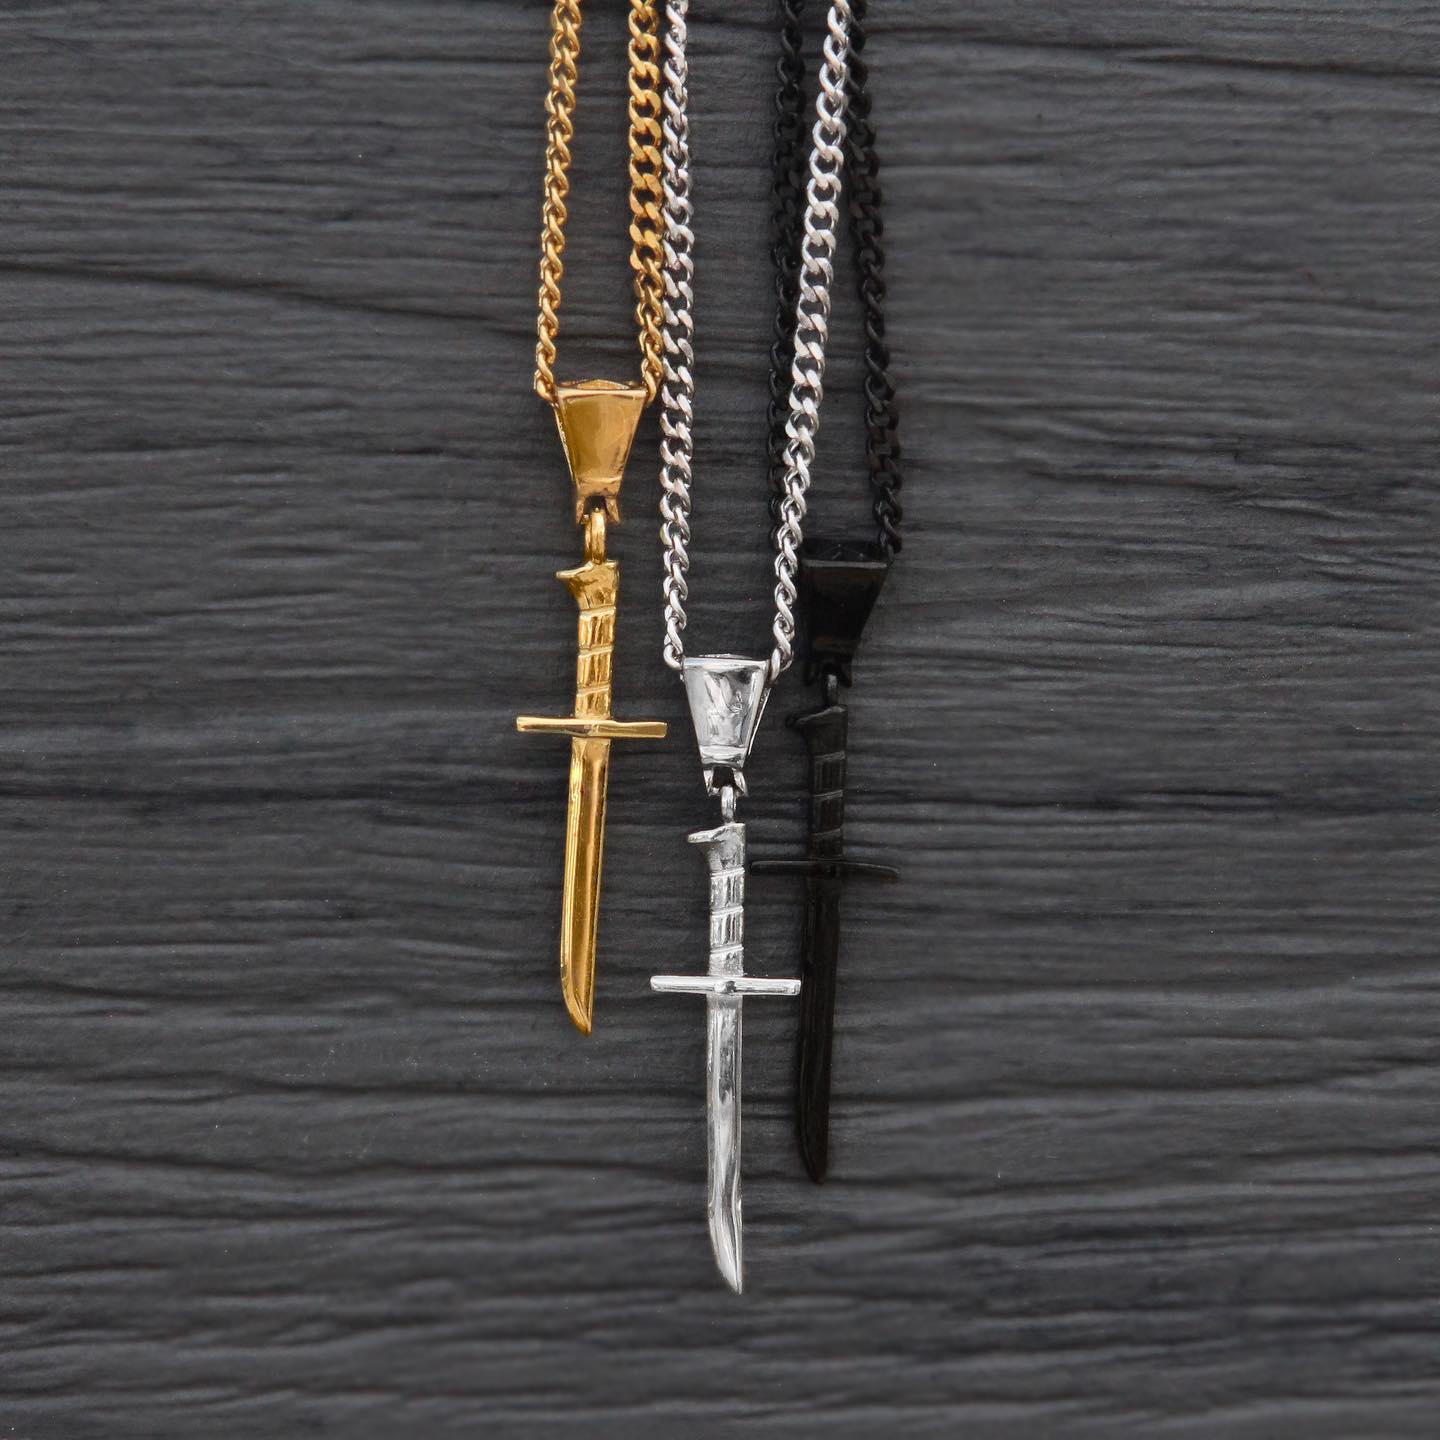 Blade of Balance Necklace 🗡

Comes...